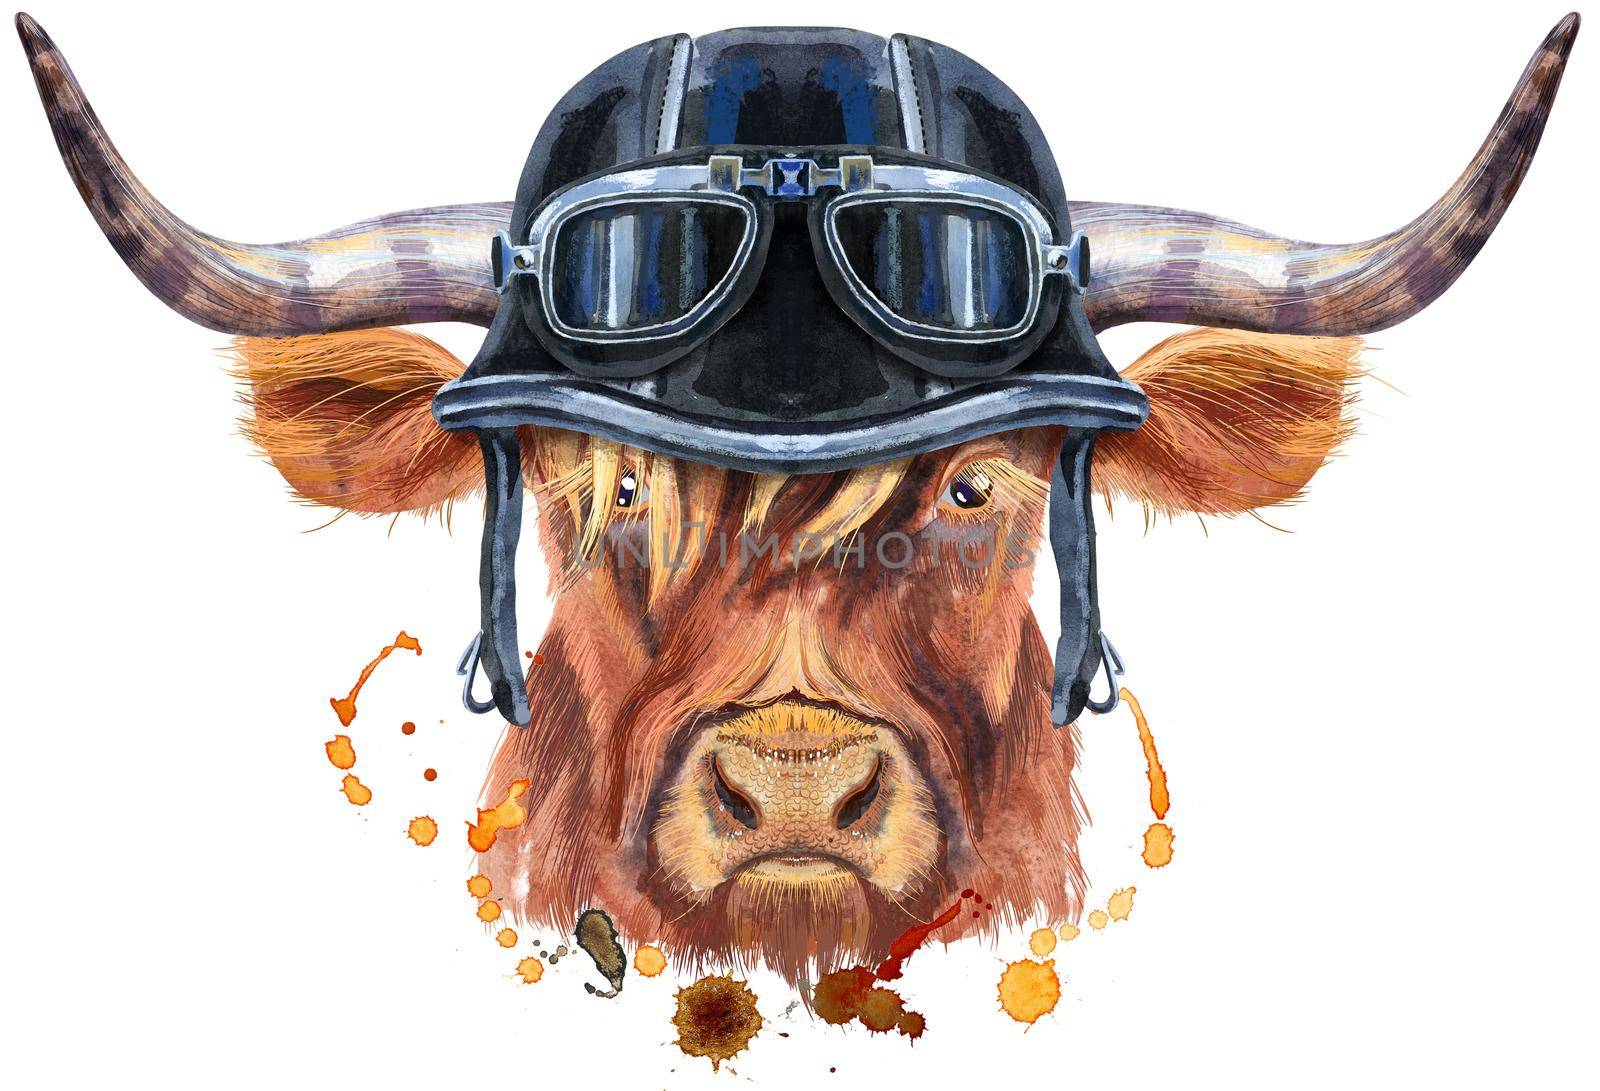 Bull watercolor graphics. Bull in a biker helmet with glasses. Animal illustration with splash watercolor textured background.